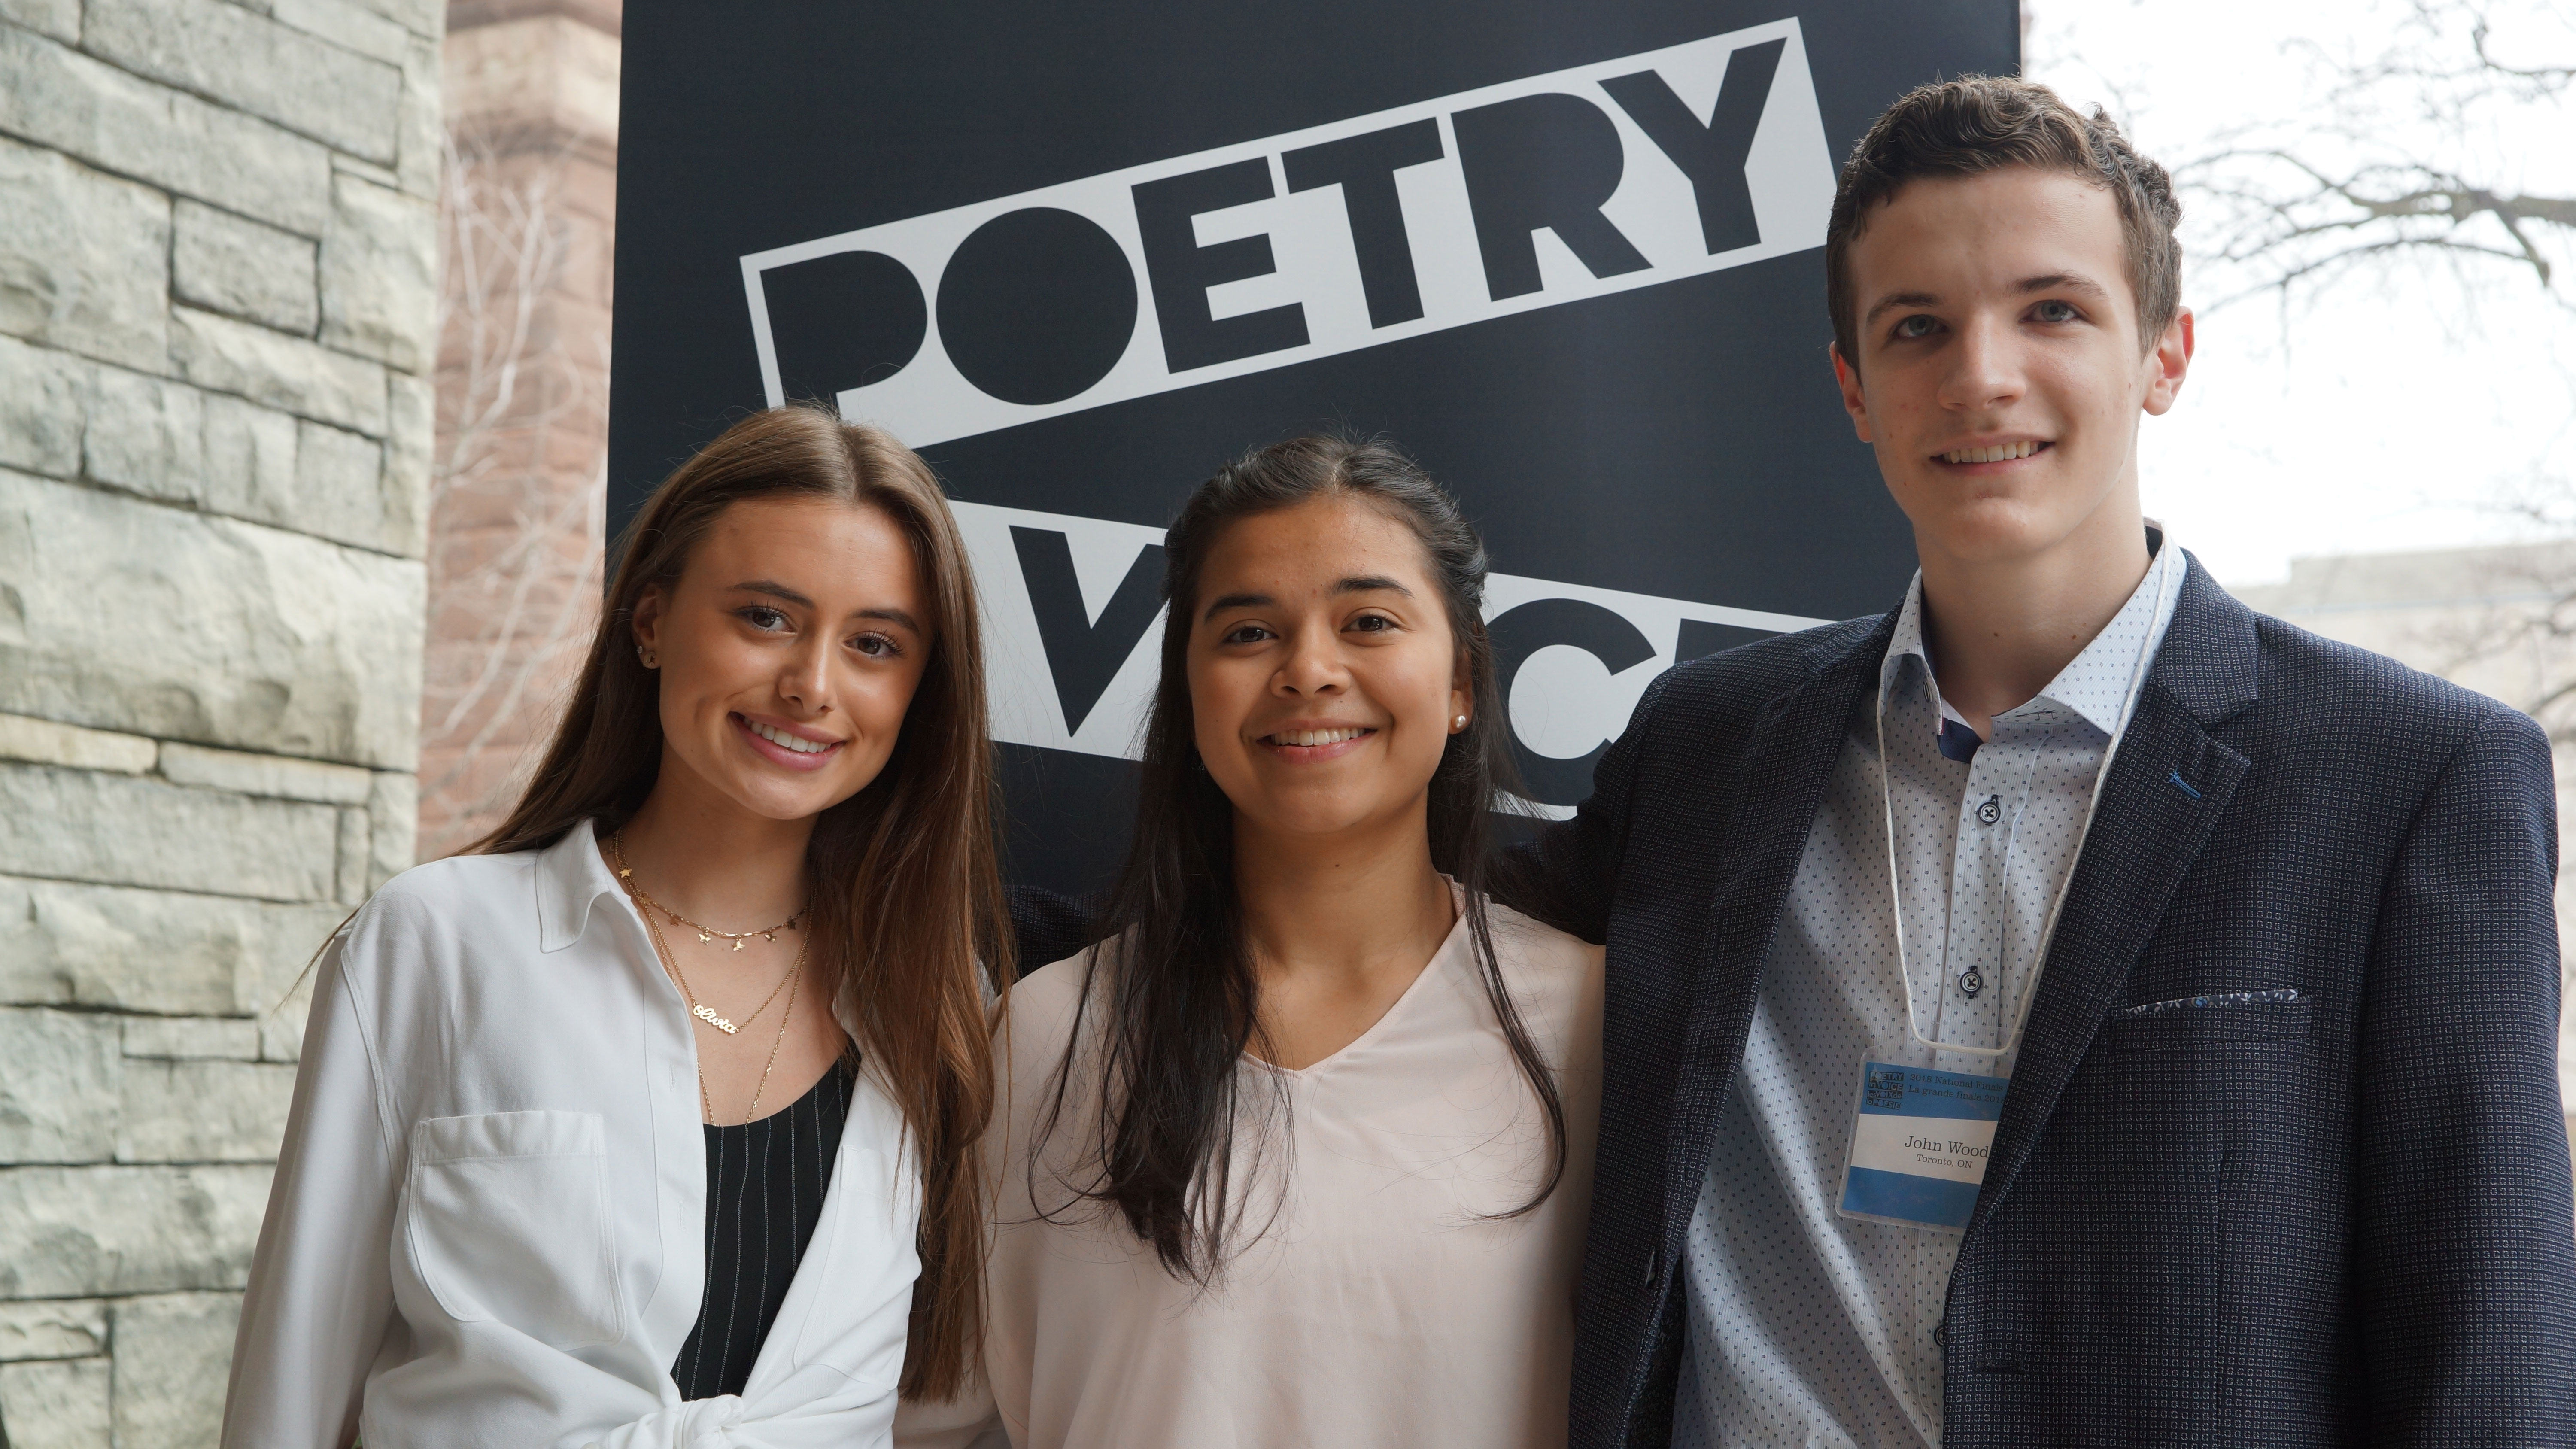 In the Bilingual Prize Stream, the three finalists are (l to r): Olivia Torralbo, Brittany Huellas-Bruskiewicz, and John Wood.